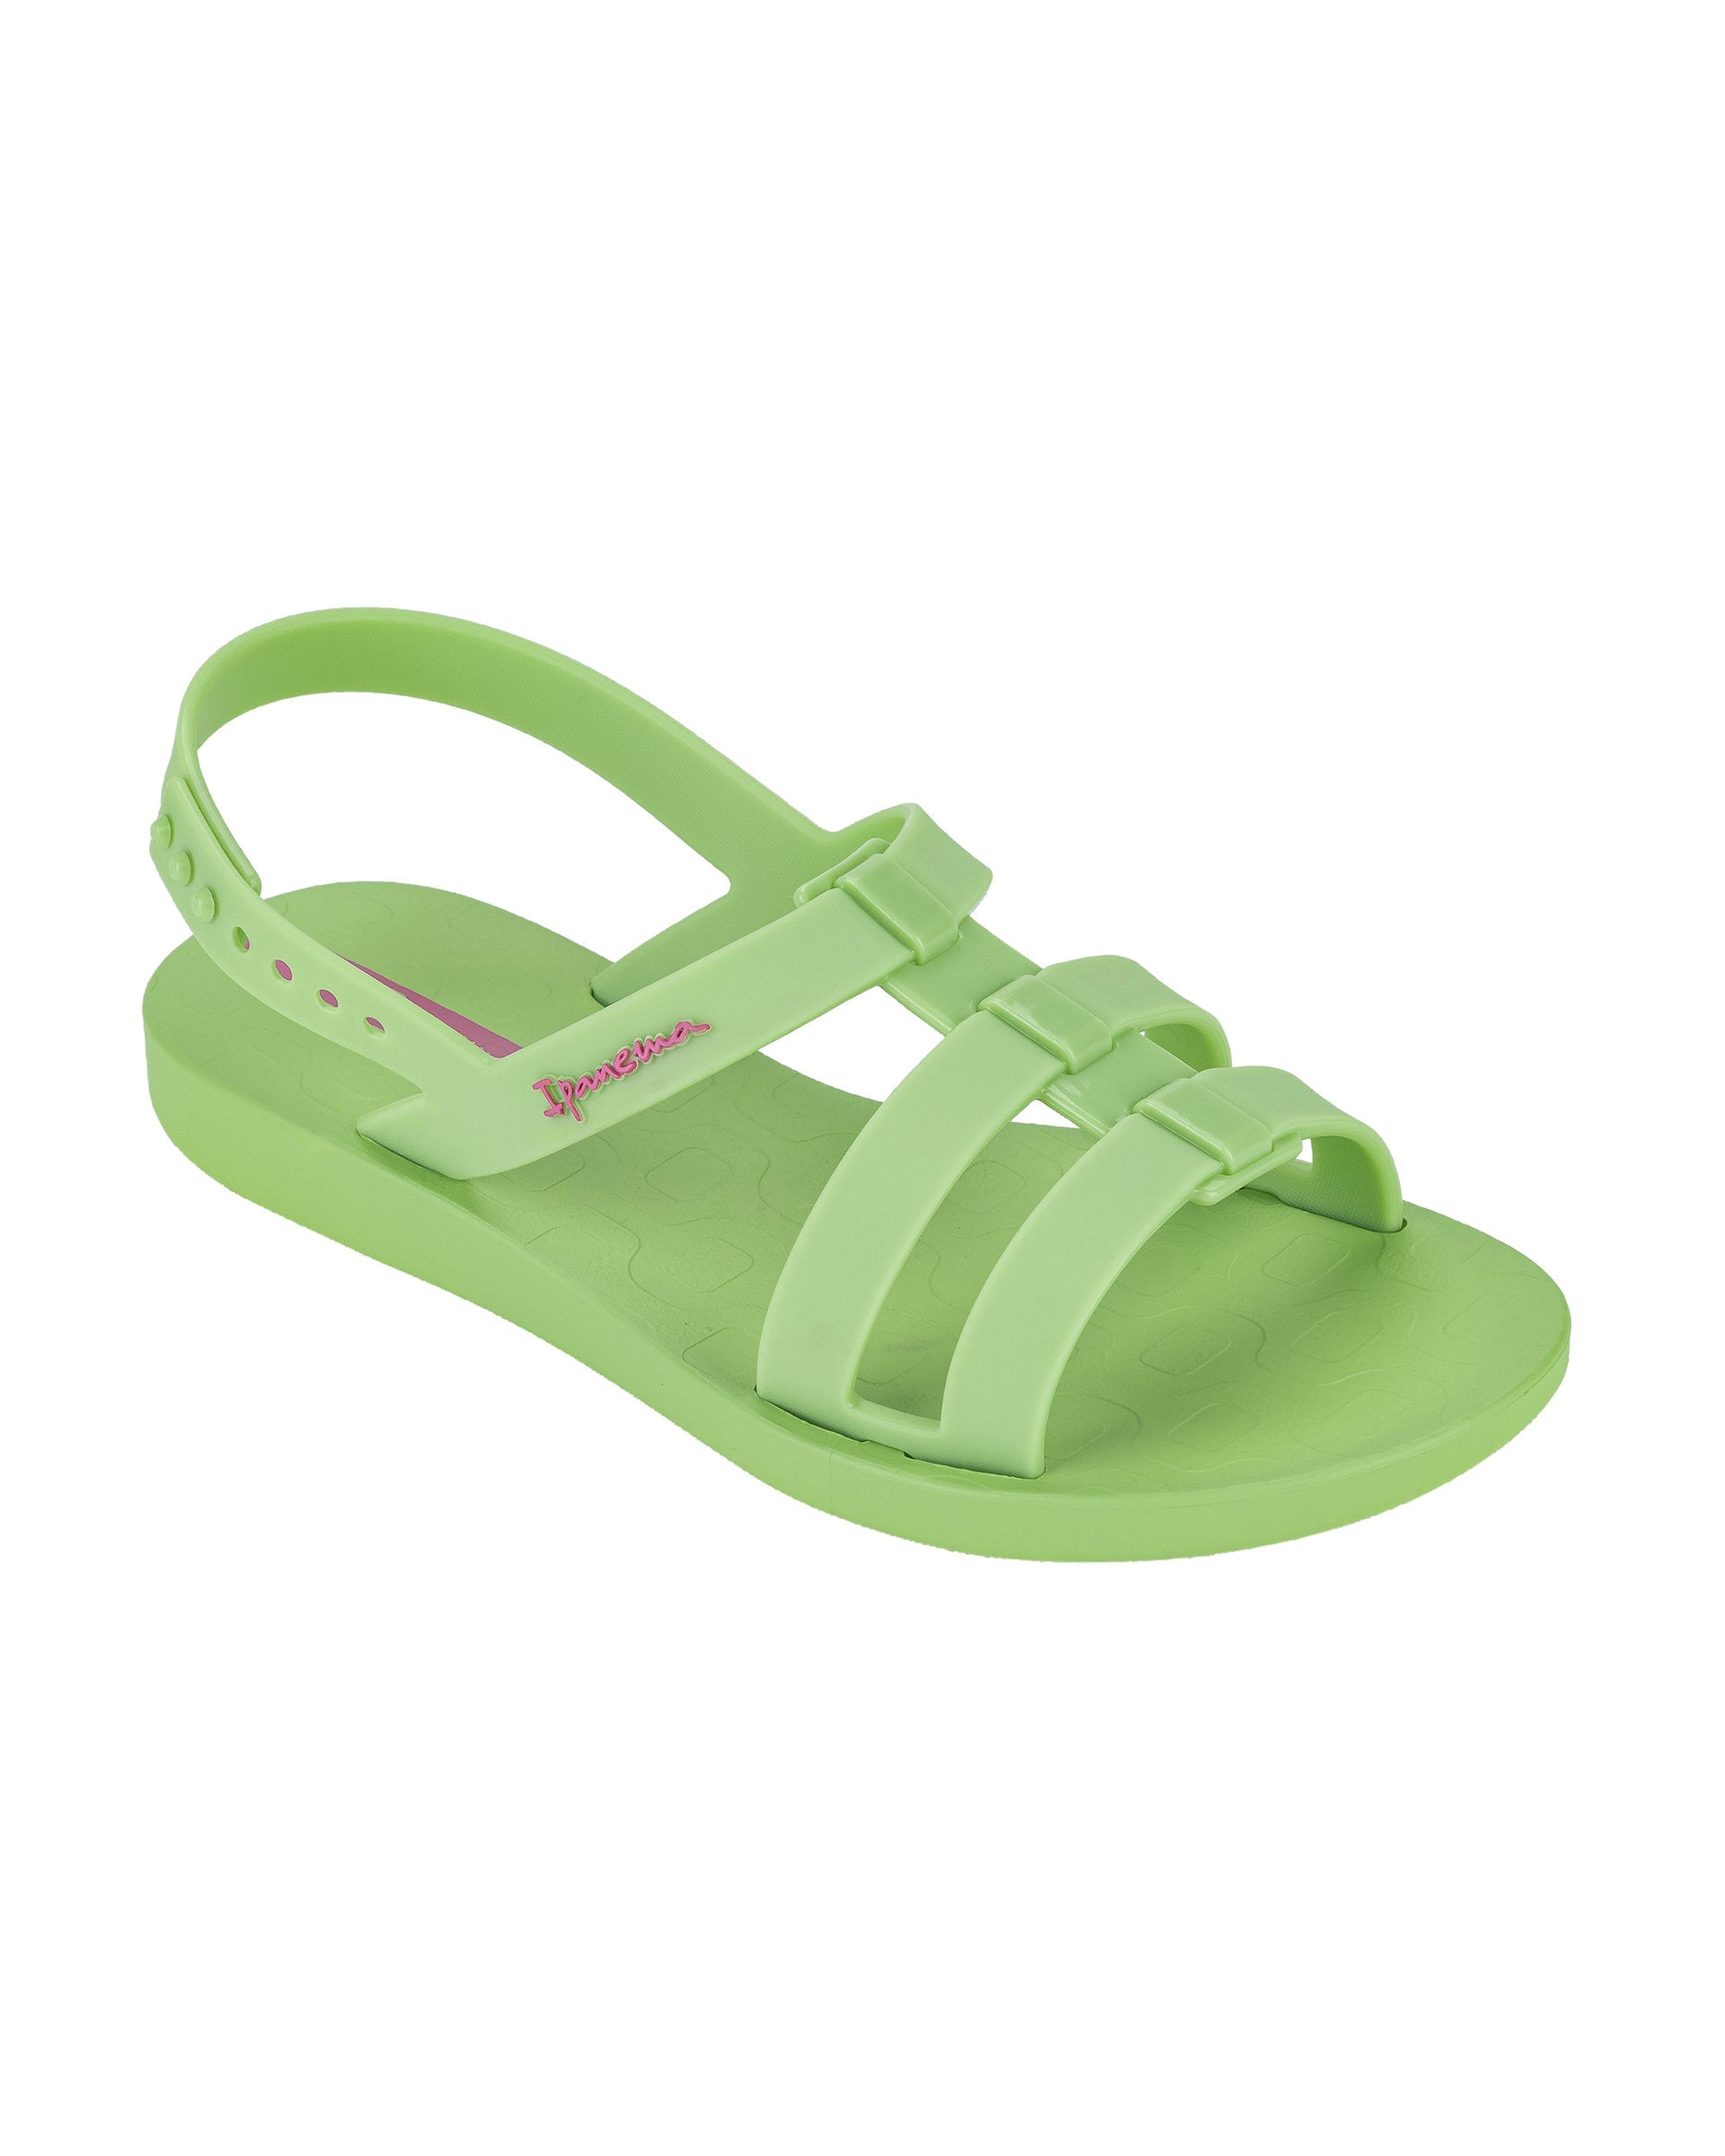 Angled view of a green Ipanema Class Go women's sandal.